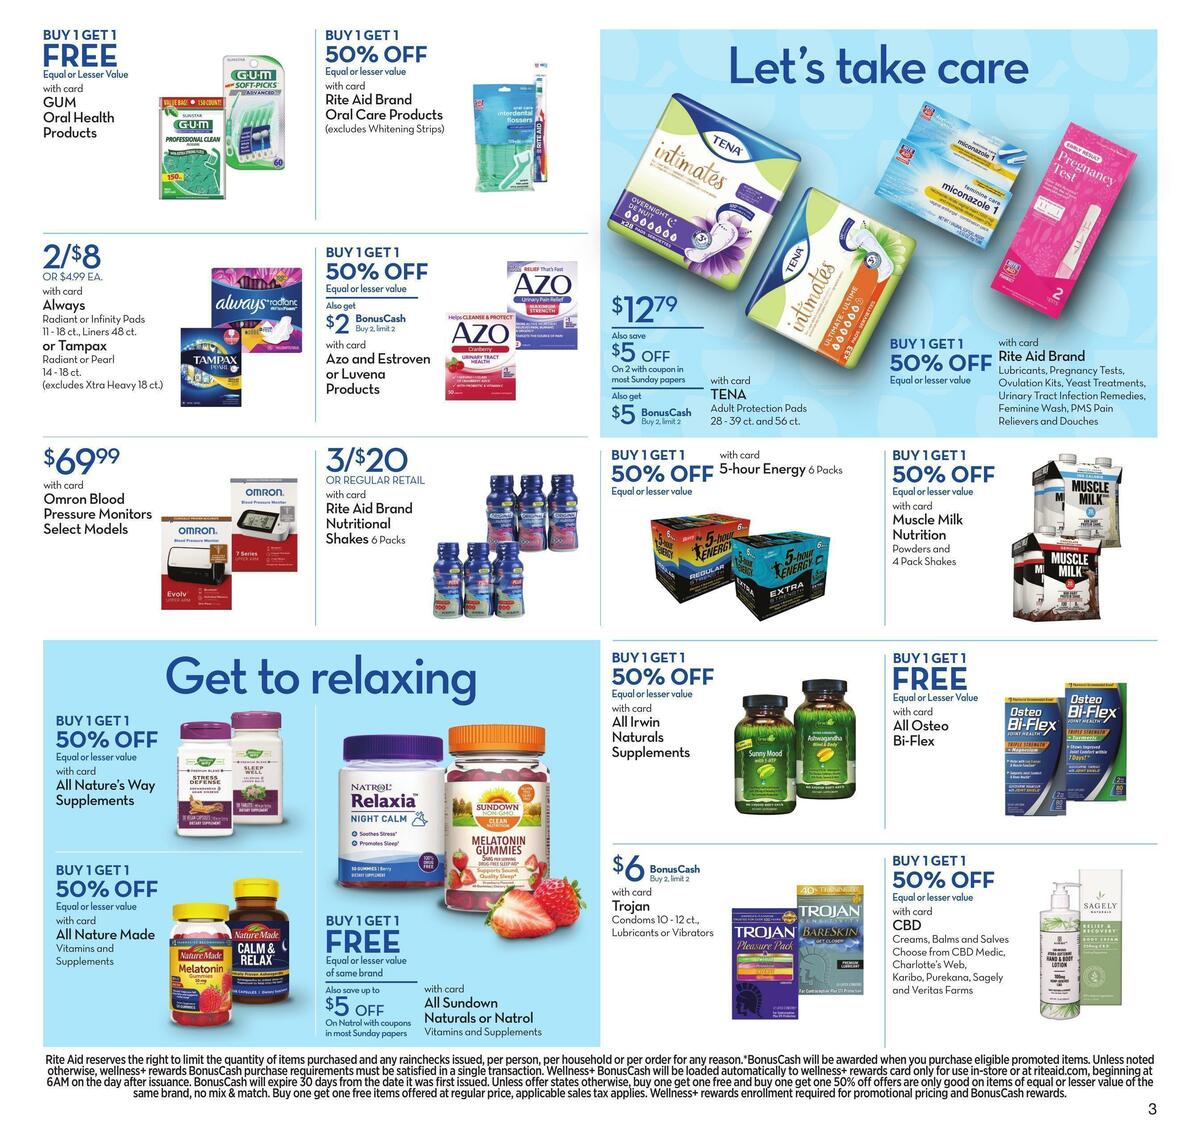 Rite Aid Weekly Ad from June 27